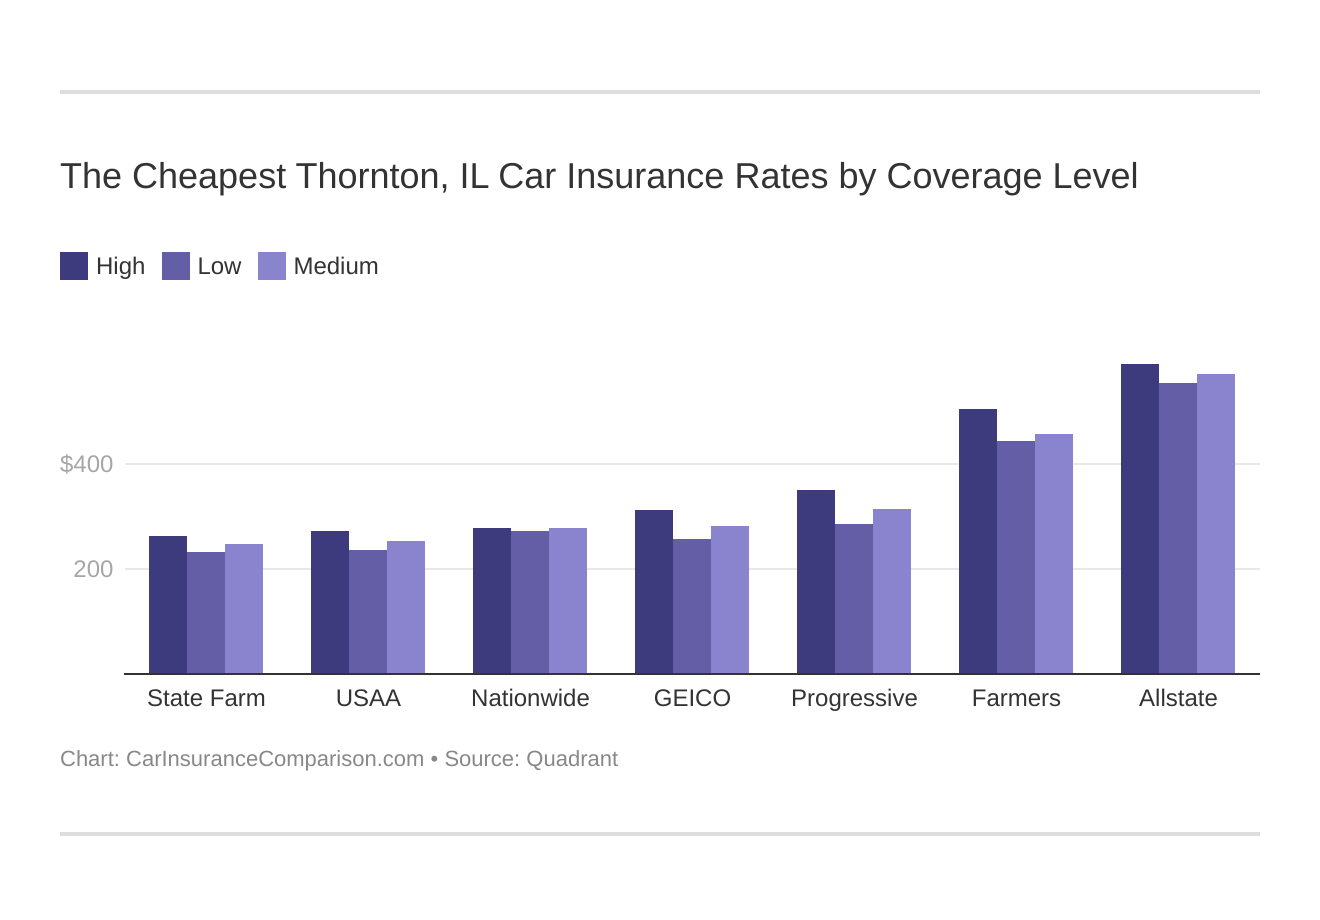 The Cheapest Thornton, IL Car Insurance Rates by Coverage Level